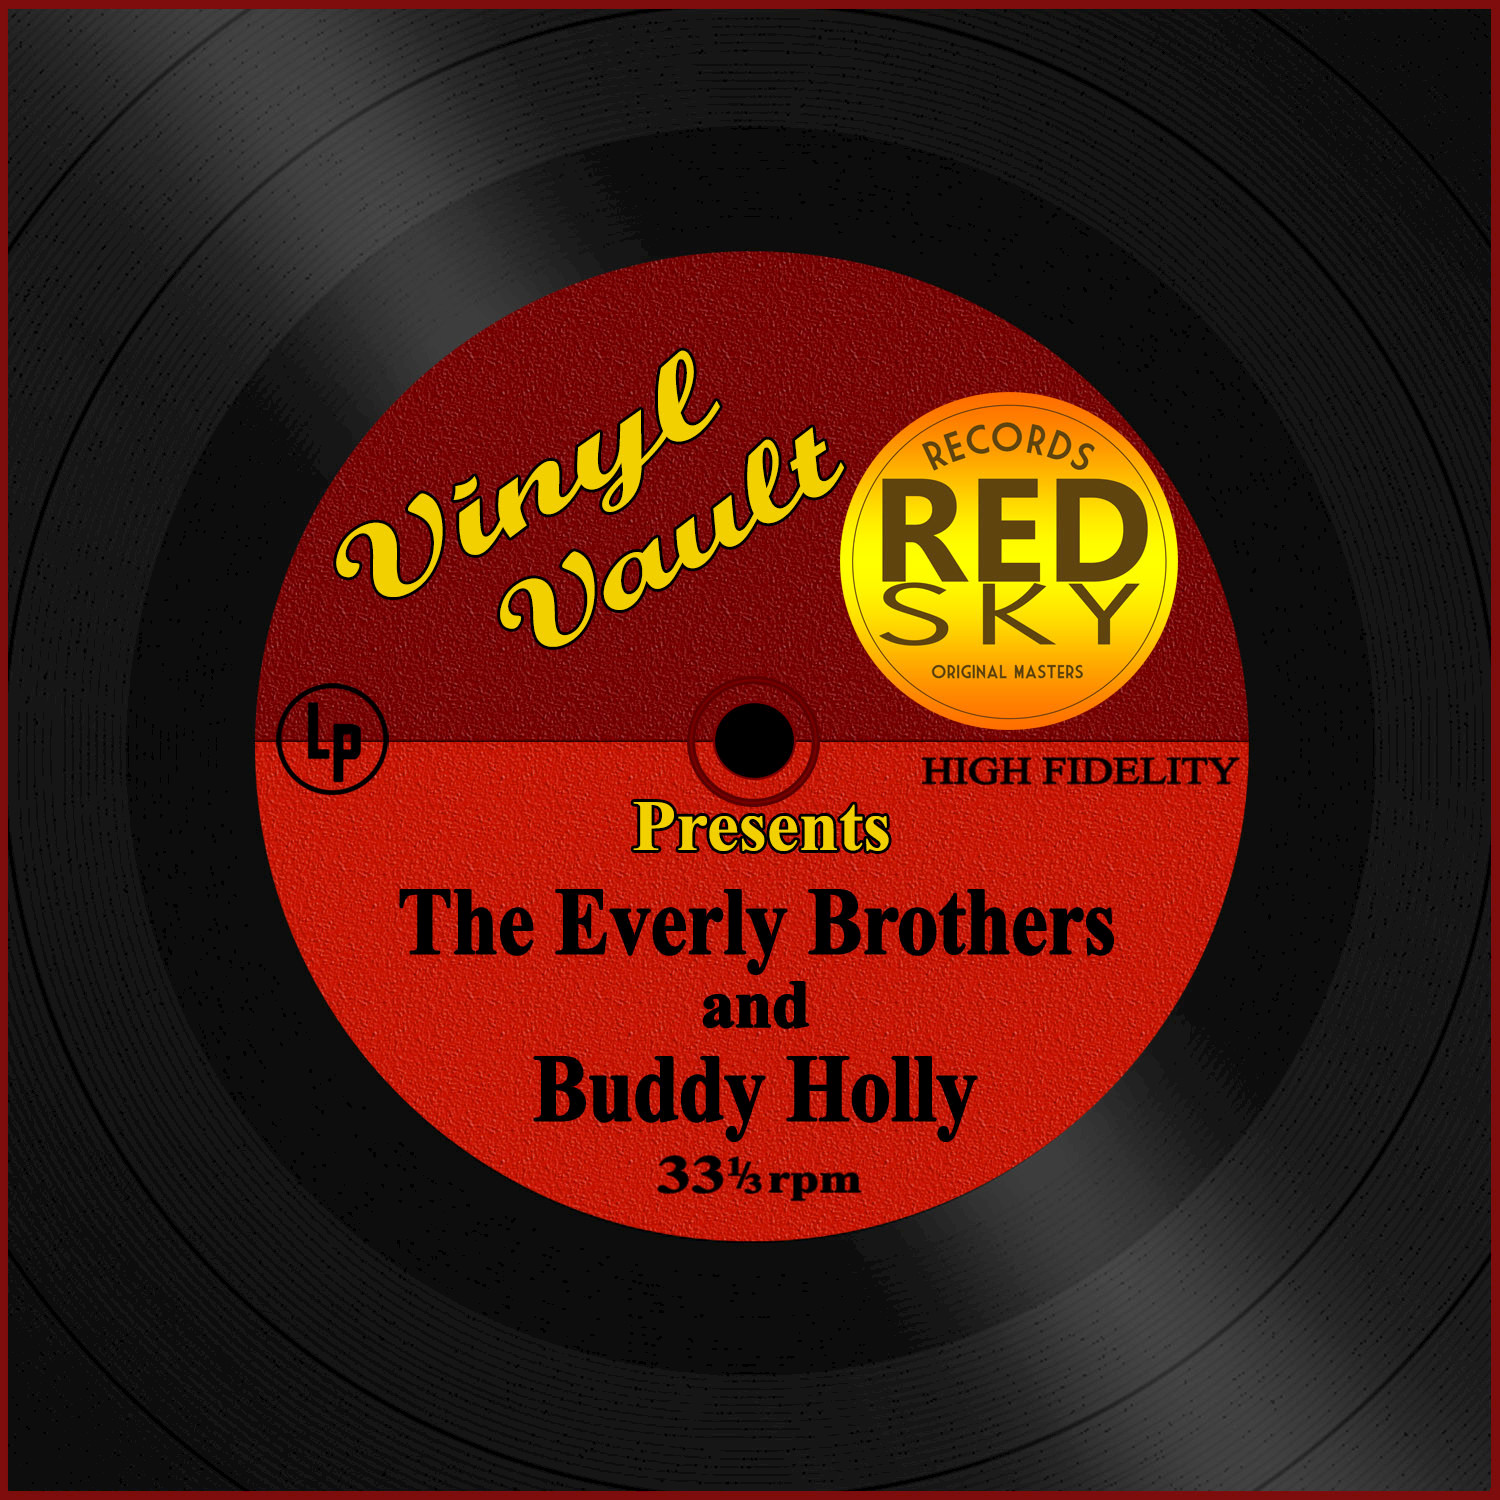 Vinyl Vault Presents The Everly Brothers and Buddy Holly